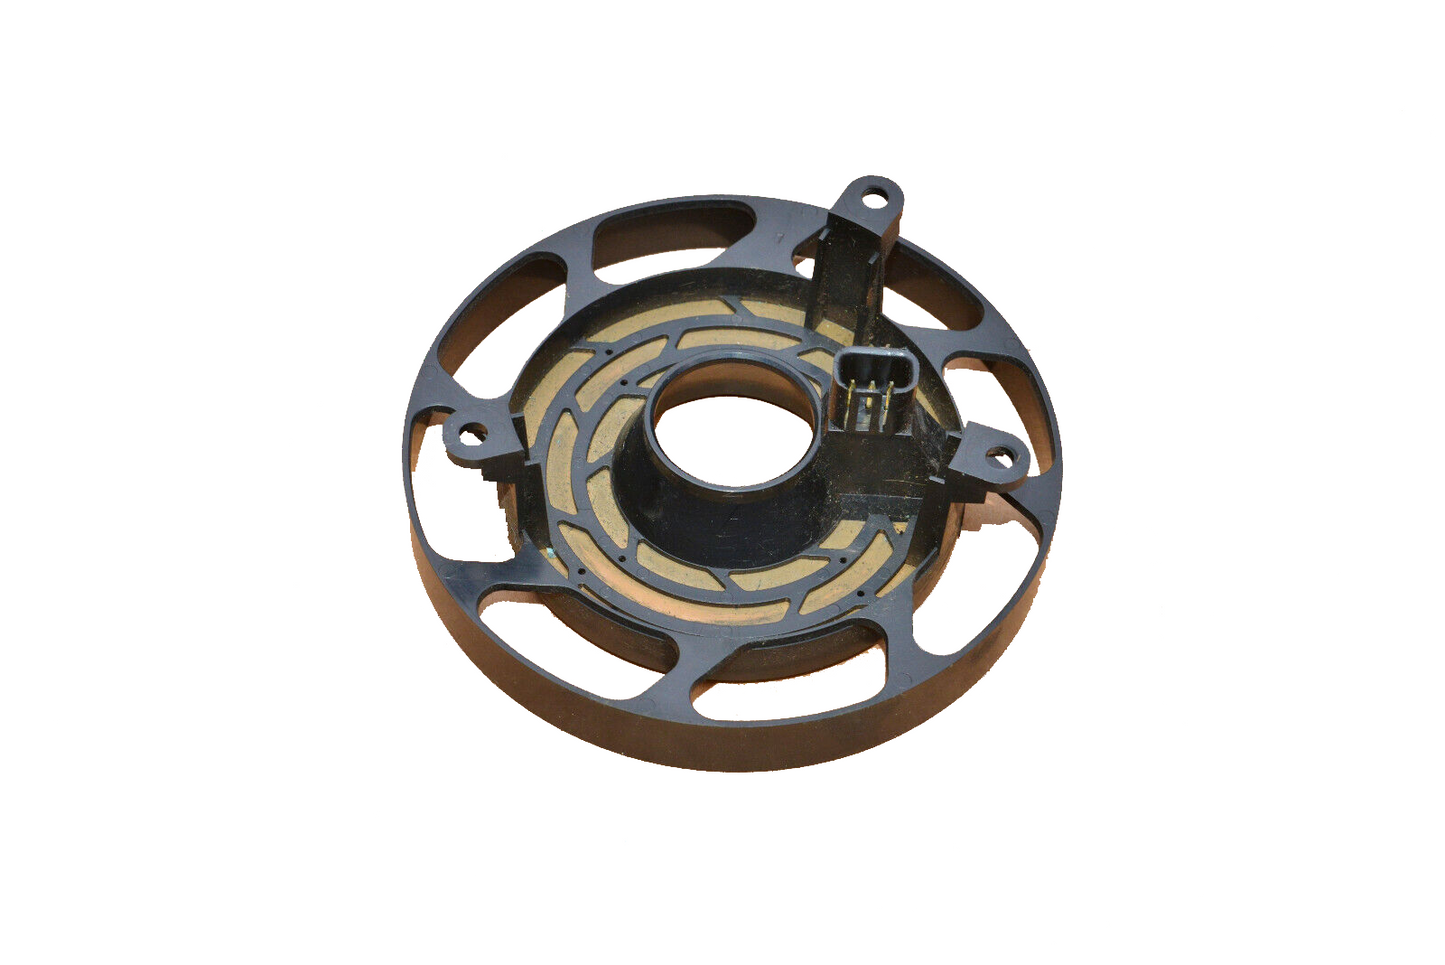 Steering wheel Contact Ring - GRADE B(Not Perfect)